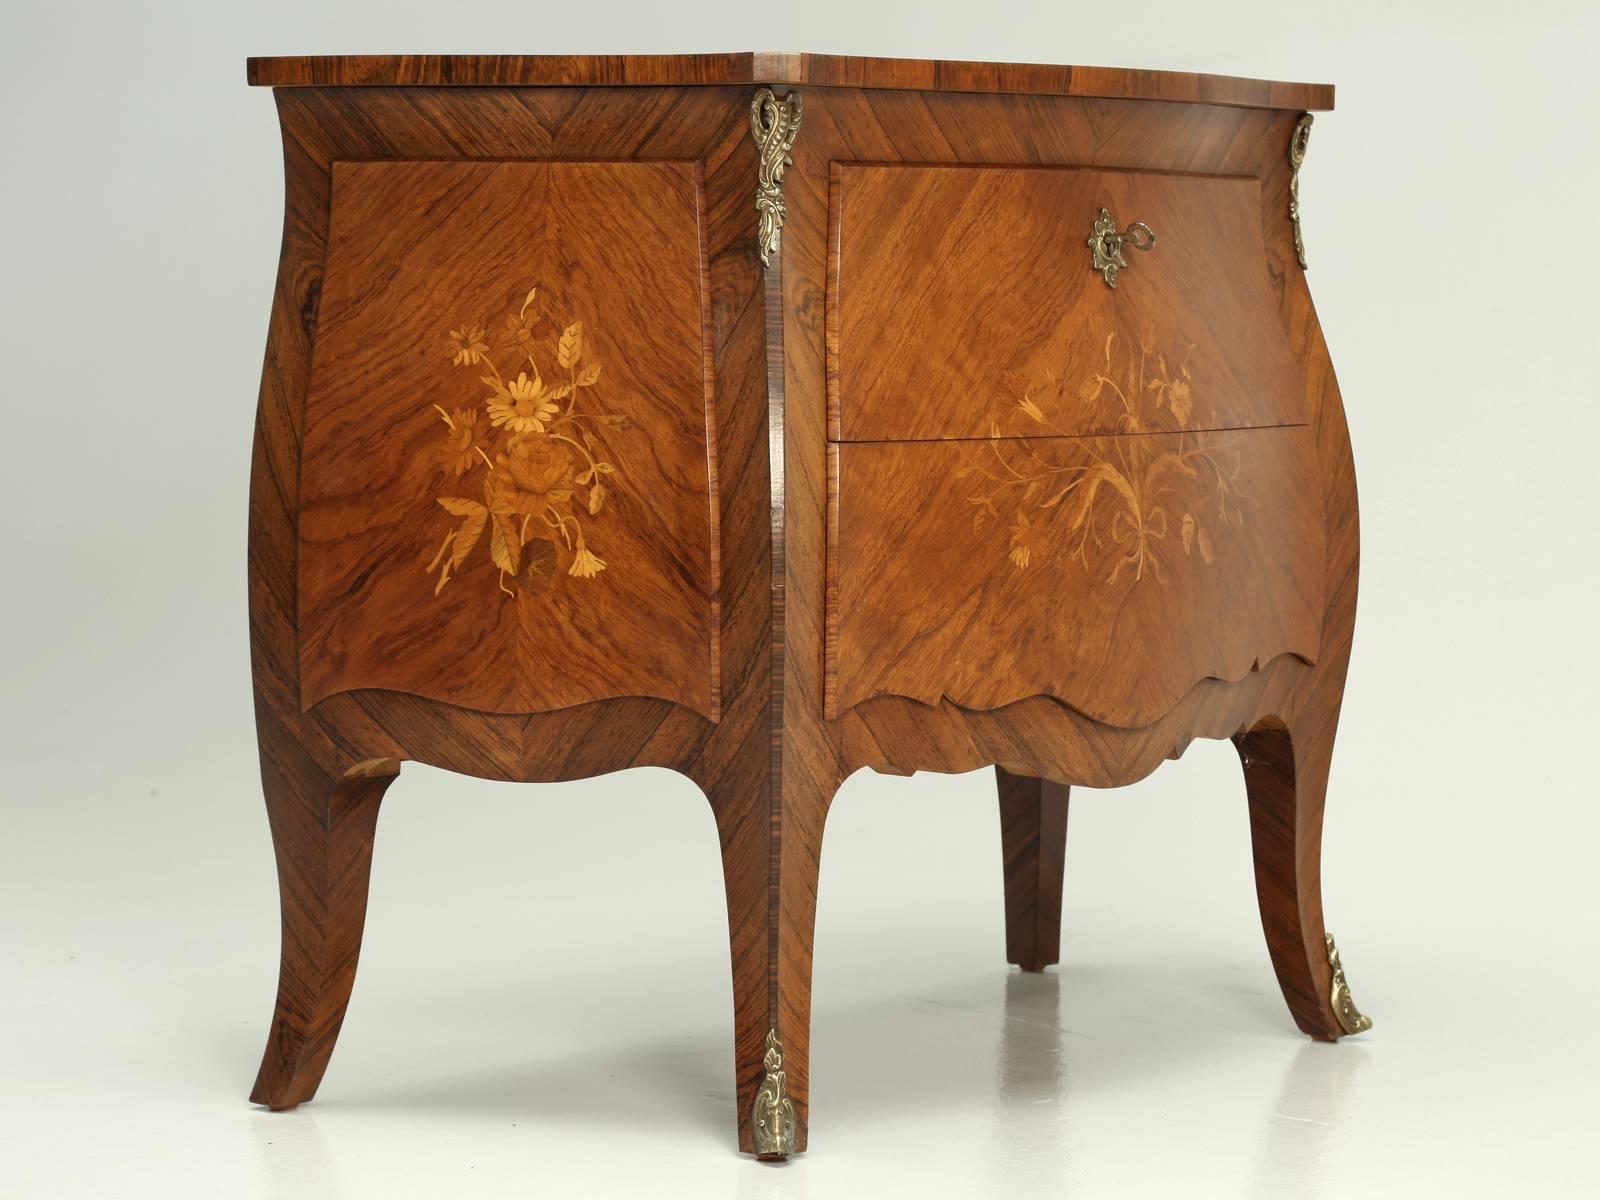 Vintage inlaid French Louis XV style commode, probably constructed during the 1930s or 1940s. What is nice about this particular French commode, is that the drawer construction quality, is really way above what we typically see. The backs of the